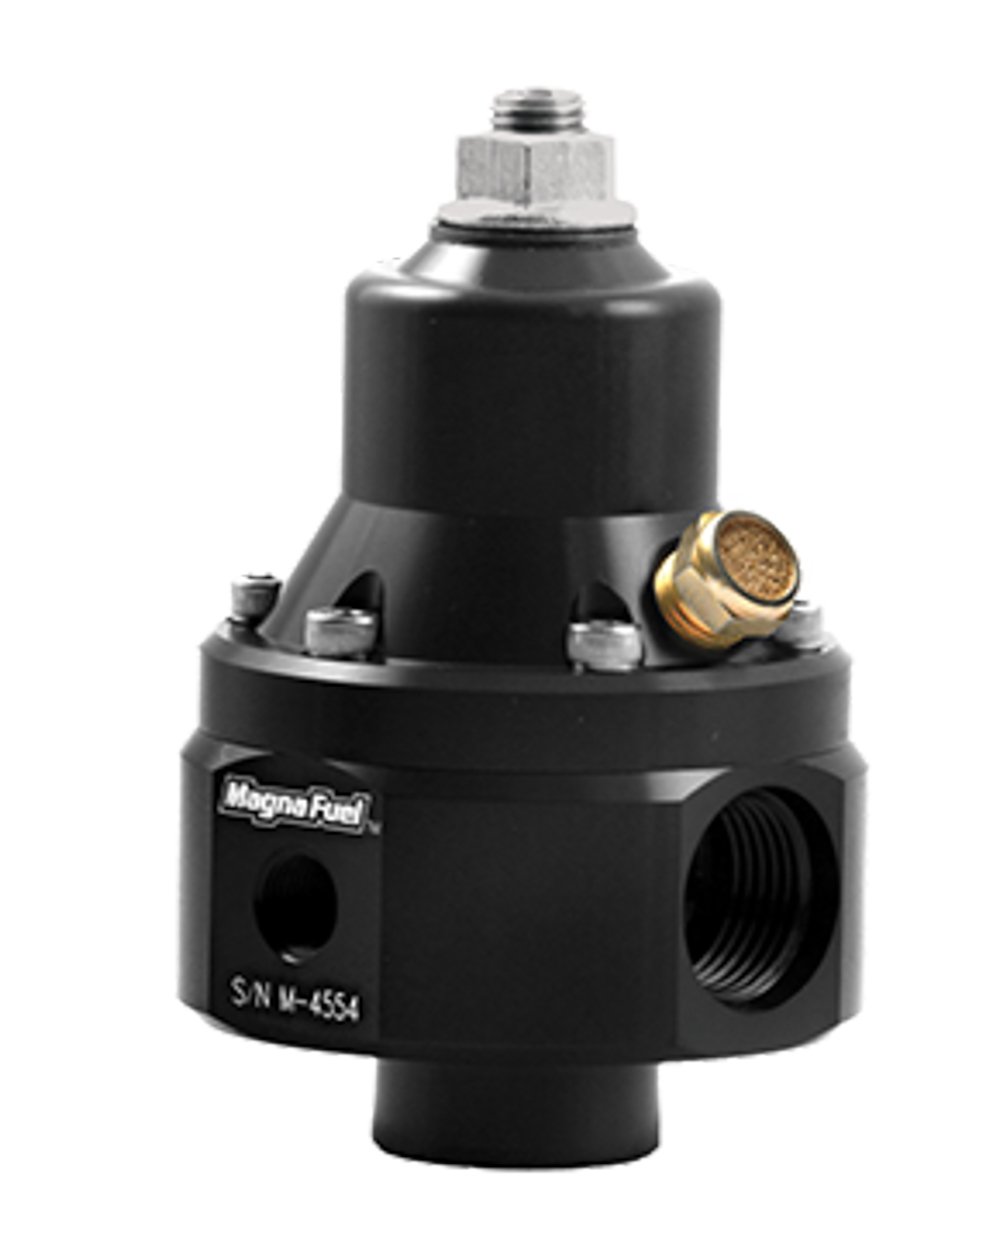 Magnafuel MP-9950-BLK Fuel Pressure Regulator, ProStar EFI, 35 to 85 psi, In-Line, 8 AN O-Ring Inlets, 8 AN O-Ring Outlet, 8 AN O-Ring Return, Bypass, 1/8 in NPT, Aluminum, Black Anodized, E85 / Gas / Methanol / Each